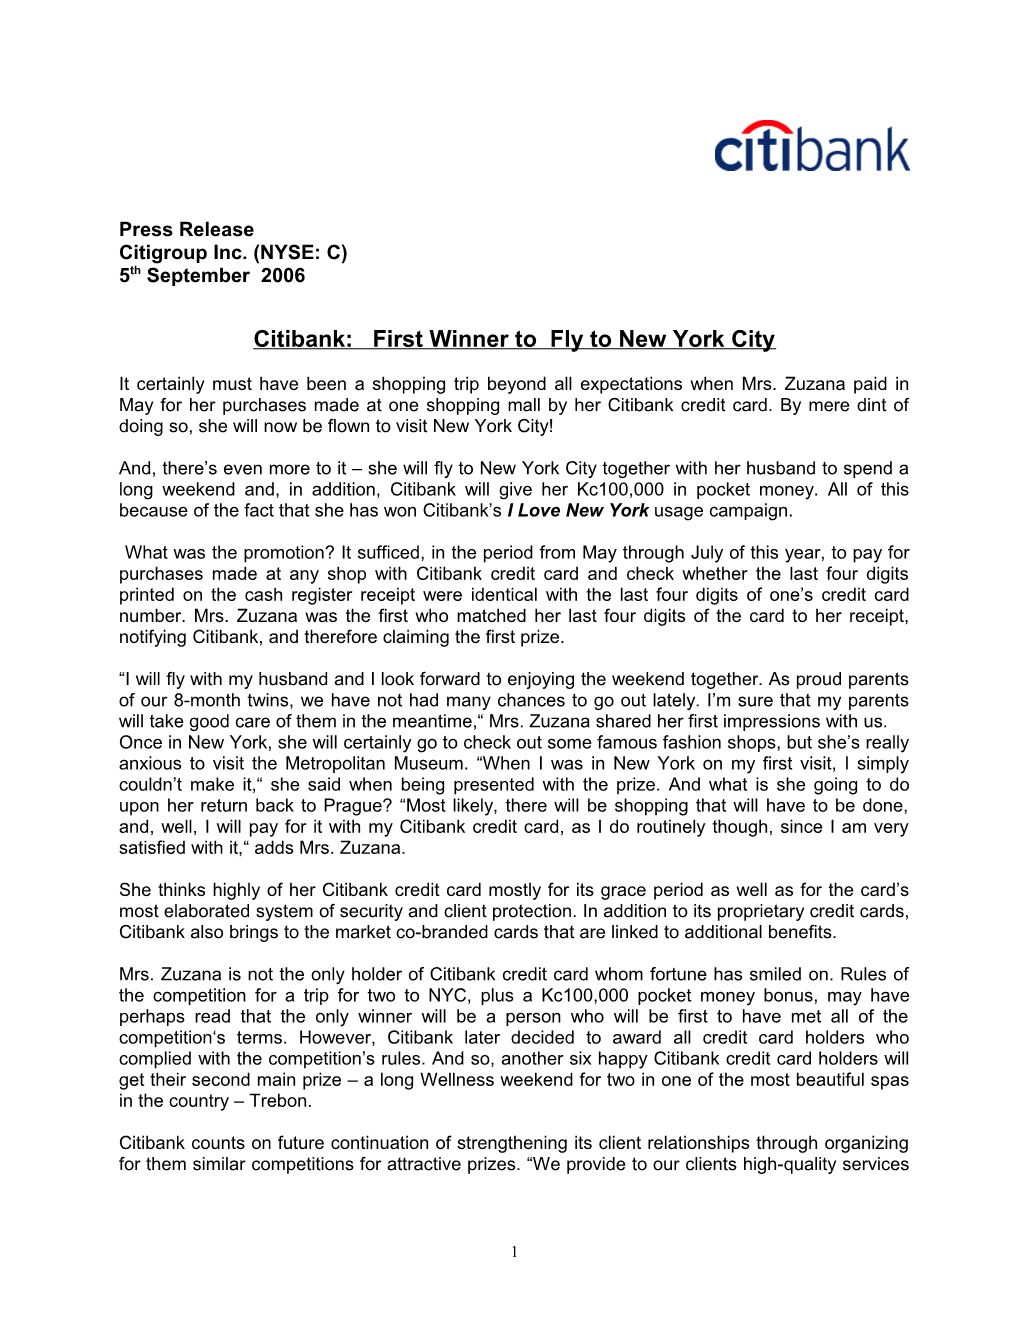 Citibank: First Winner to Fly to New York City